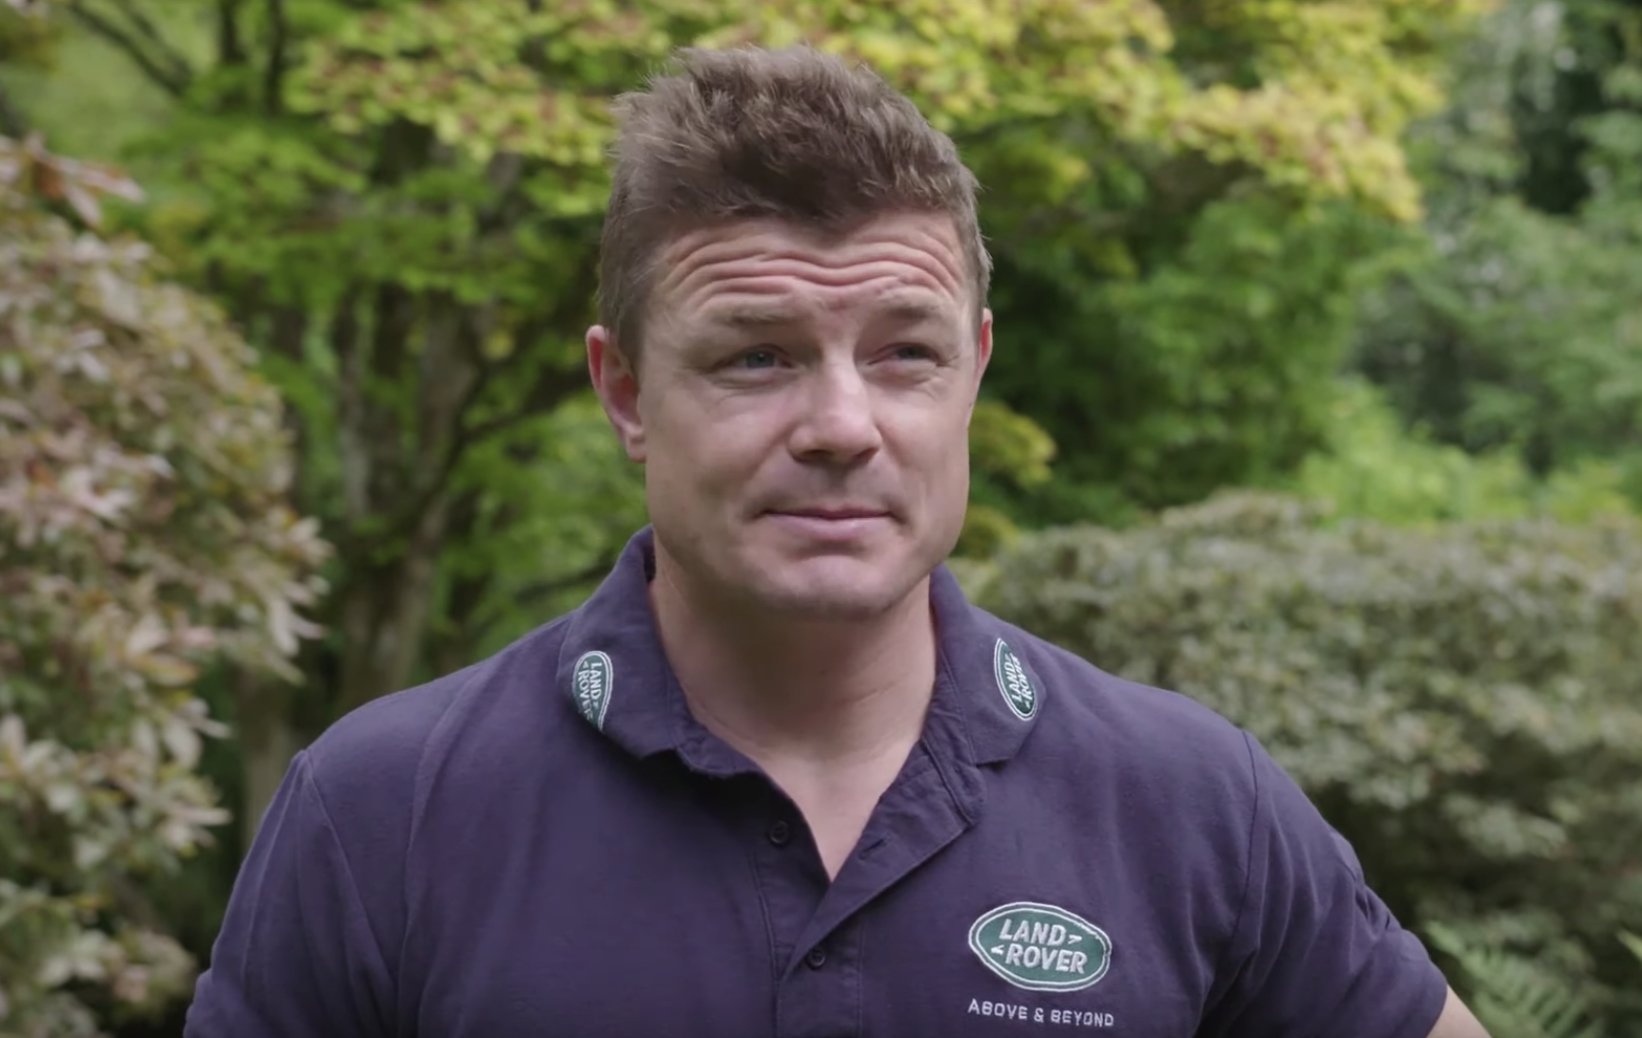 These Brian O'Driscoll and Nigel Owens impressions are absolutely spot on